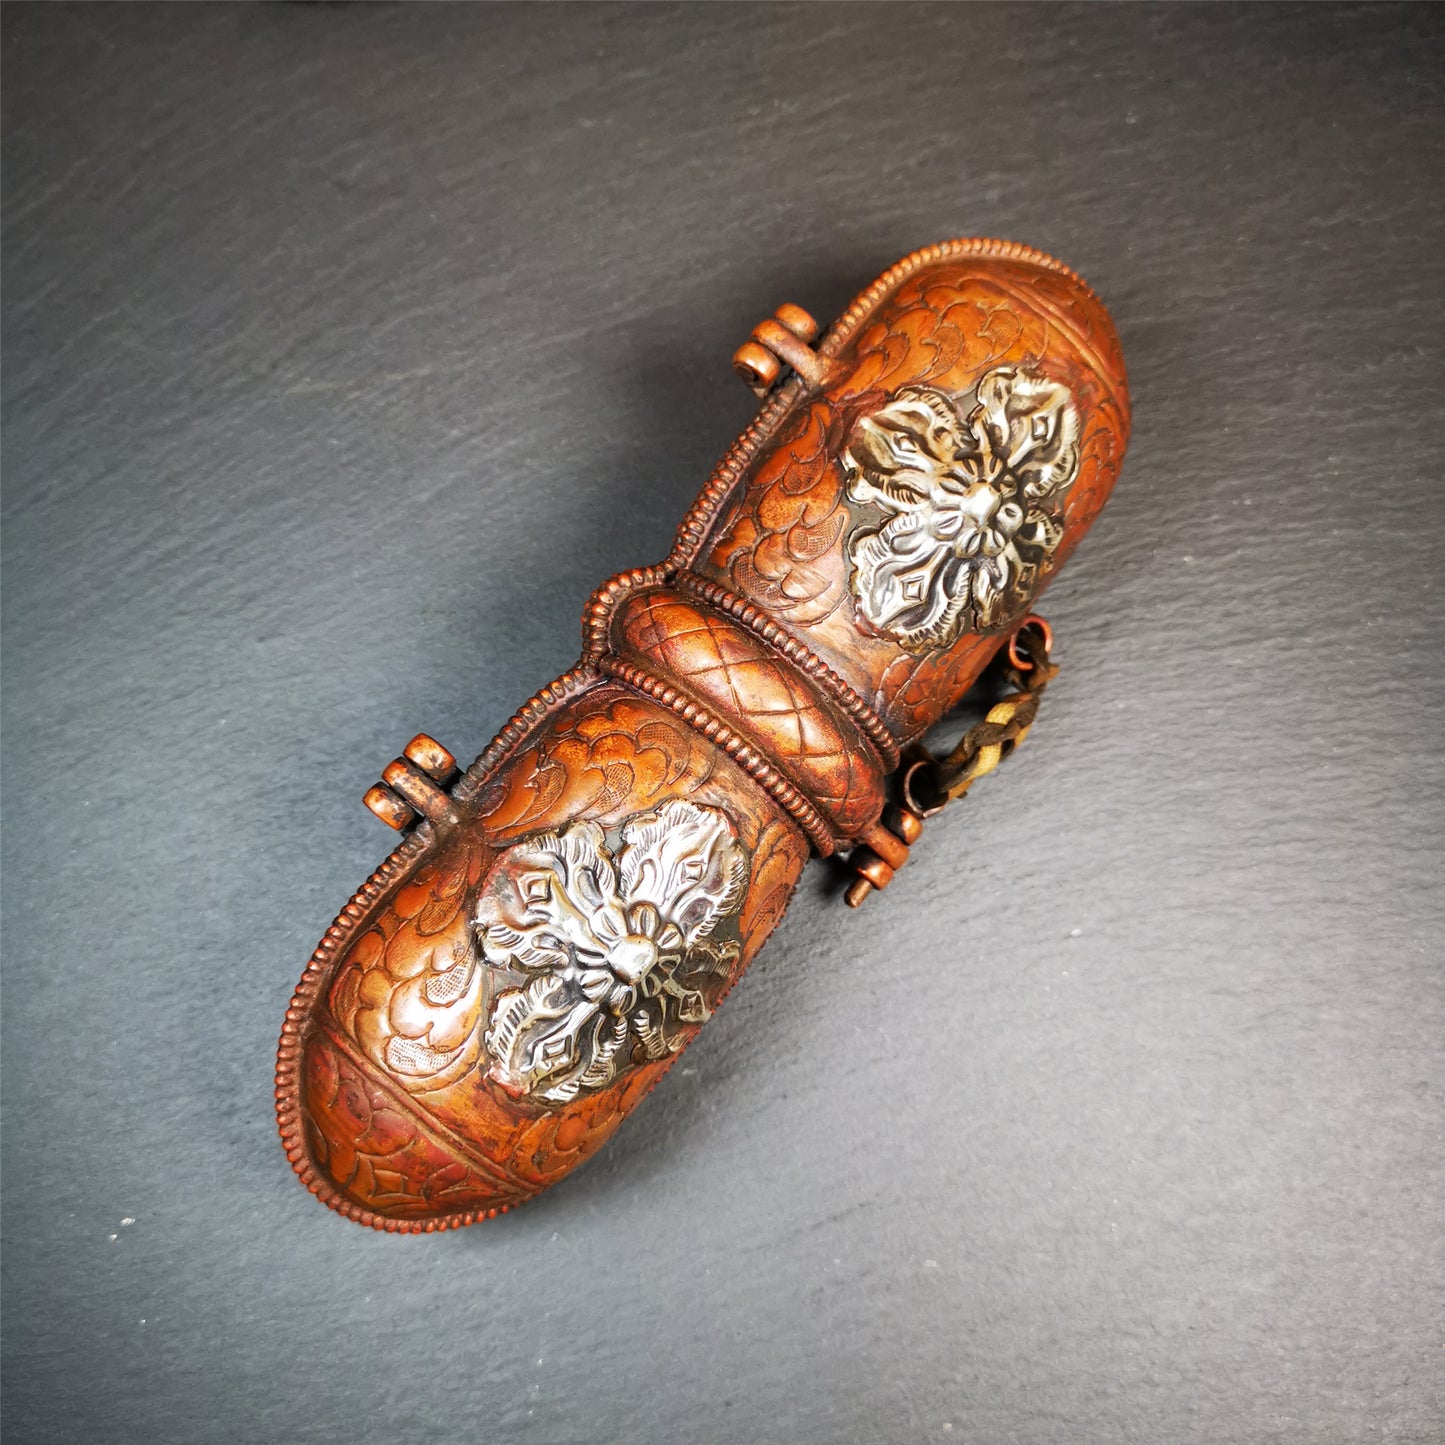 This vajra set was handmade in Nepal,using traditional techniques and materials.  The Nine-pronged vajra is made of brass, and the copper outer box is made of red copper and white copper, and was carved with beautiful mandala flowers.